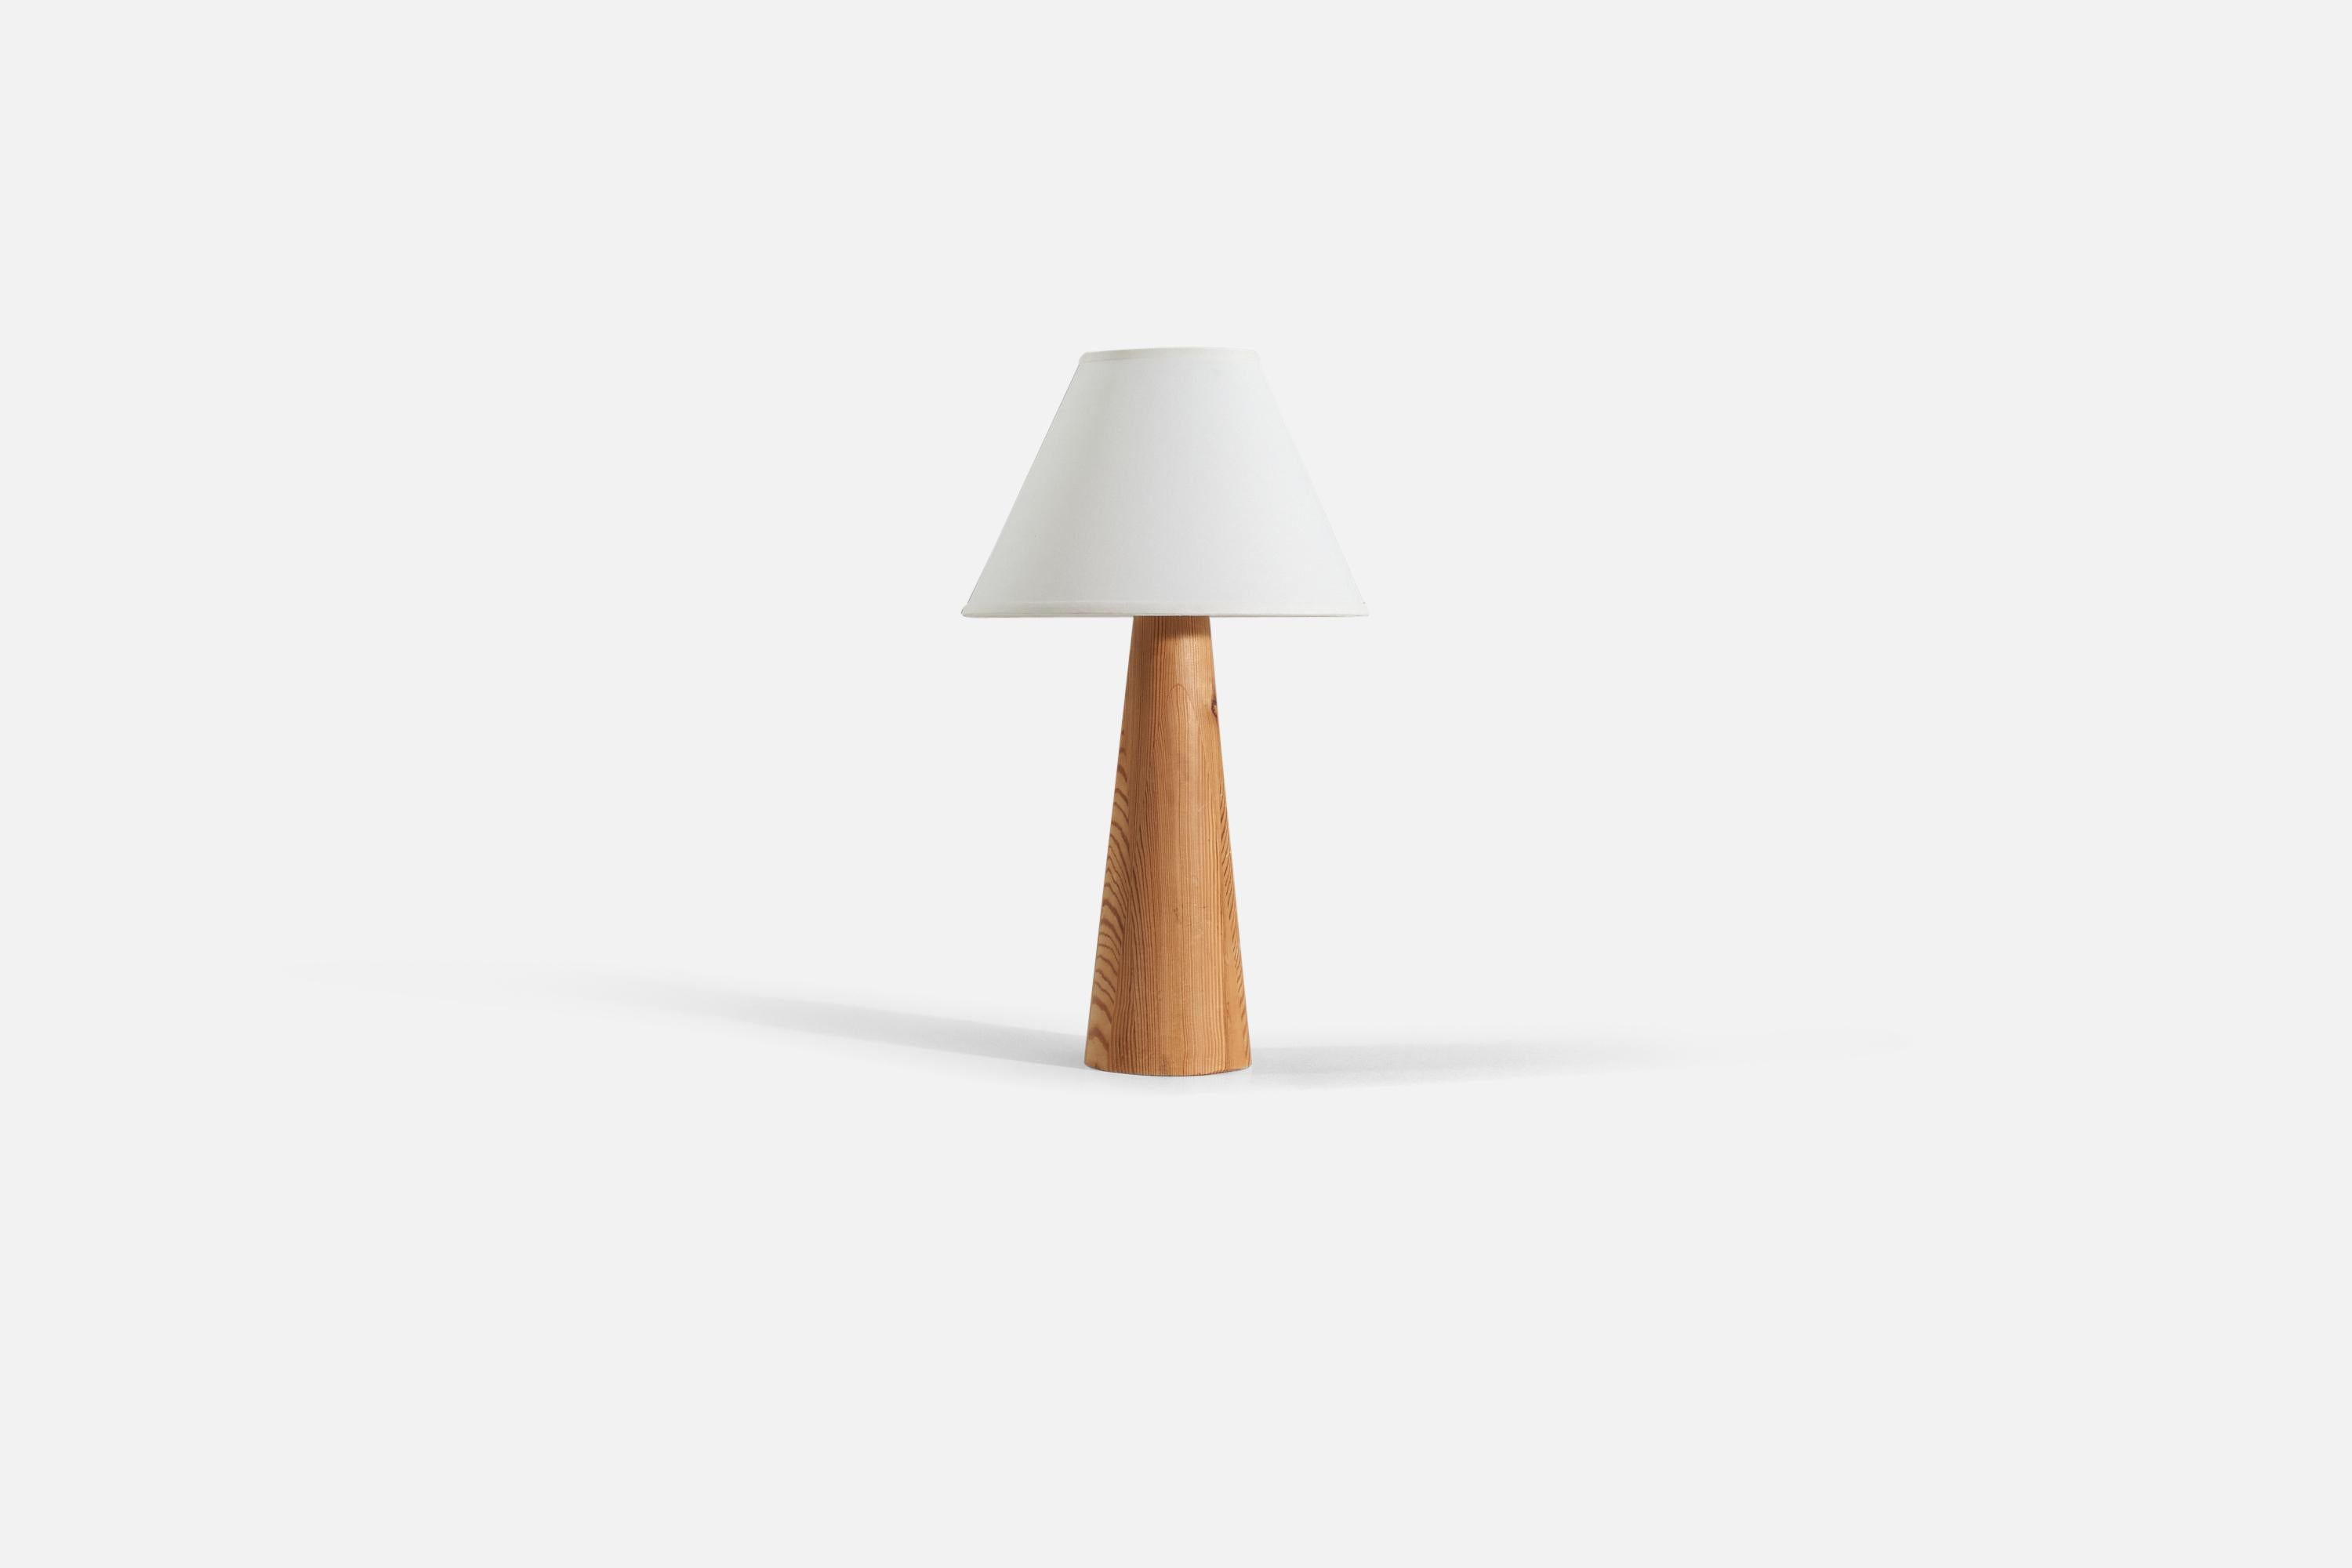 A turned solid pine table lamp, produced in Sweden, 1960s.

Sold without lampshade. 

Measurements listed are of lamp.
Shade : 5 x 12.25 x 8.75
Lamp with shade : 21.75 x 12.25 x 12.25